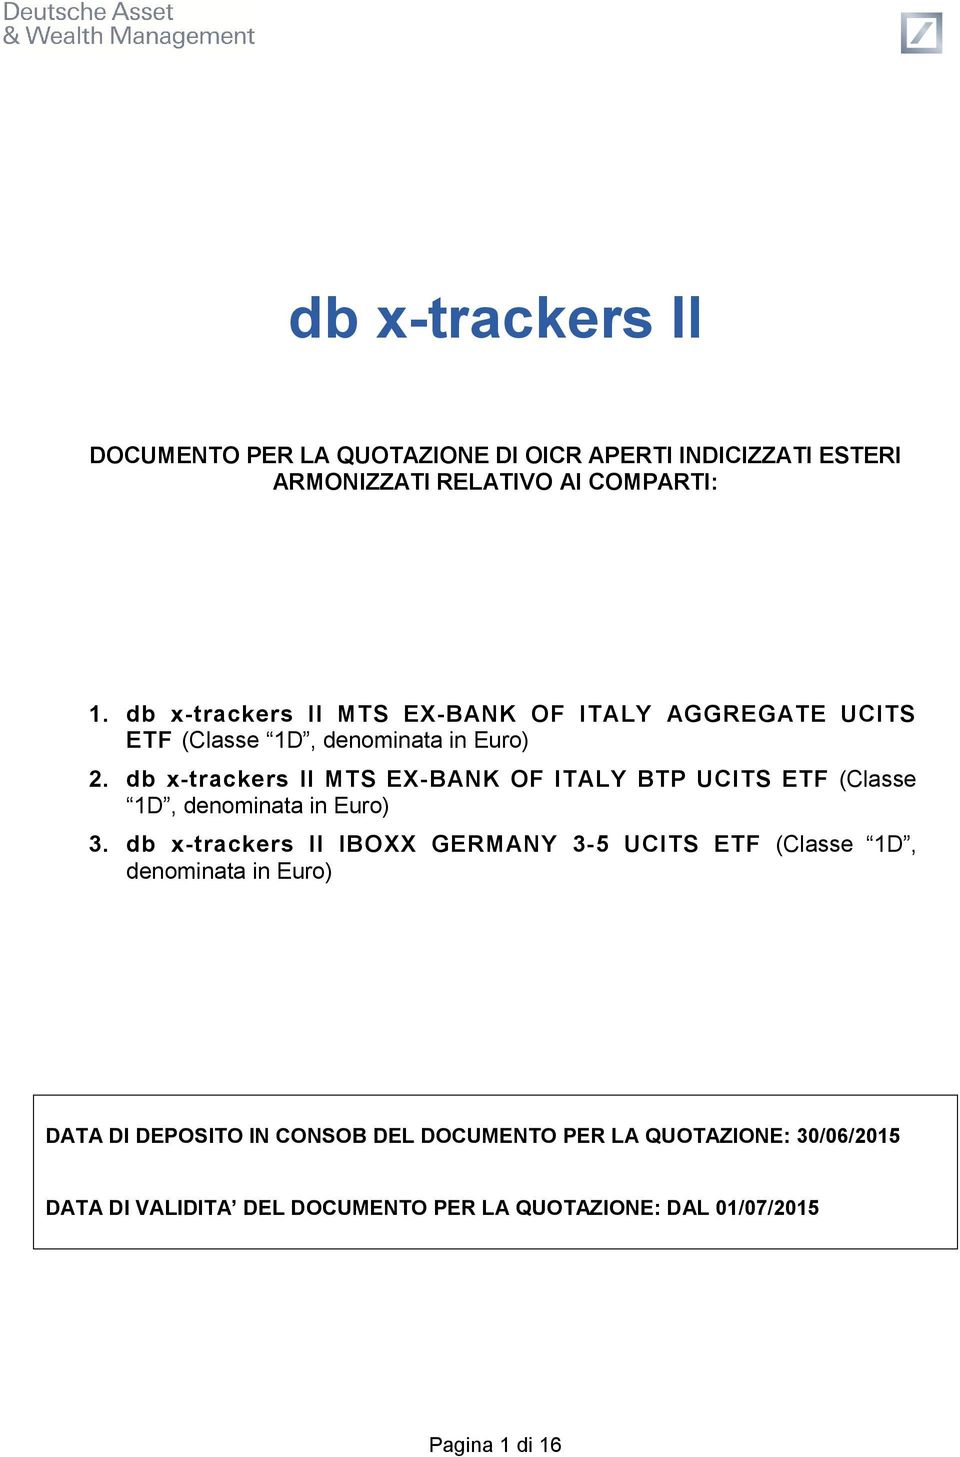 db x-trackers II MTS EX-BANK OF ITALY BTP UCITS ETF (Classe 1D, denominata in Euro) 3.